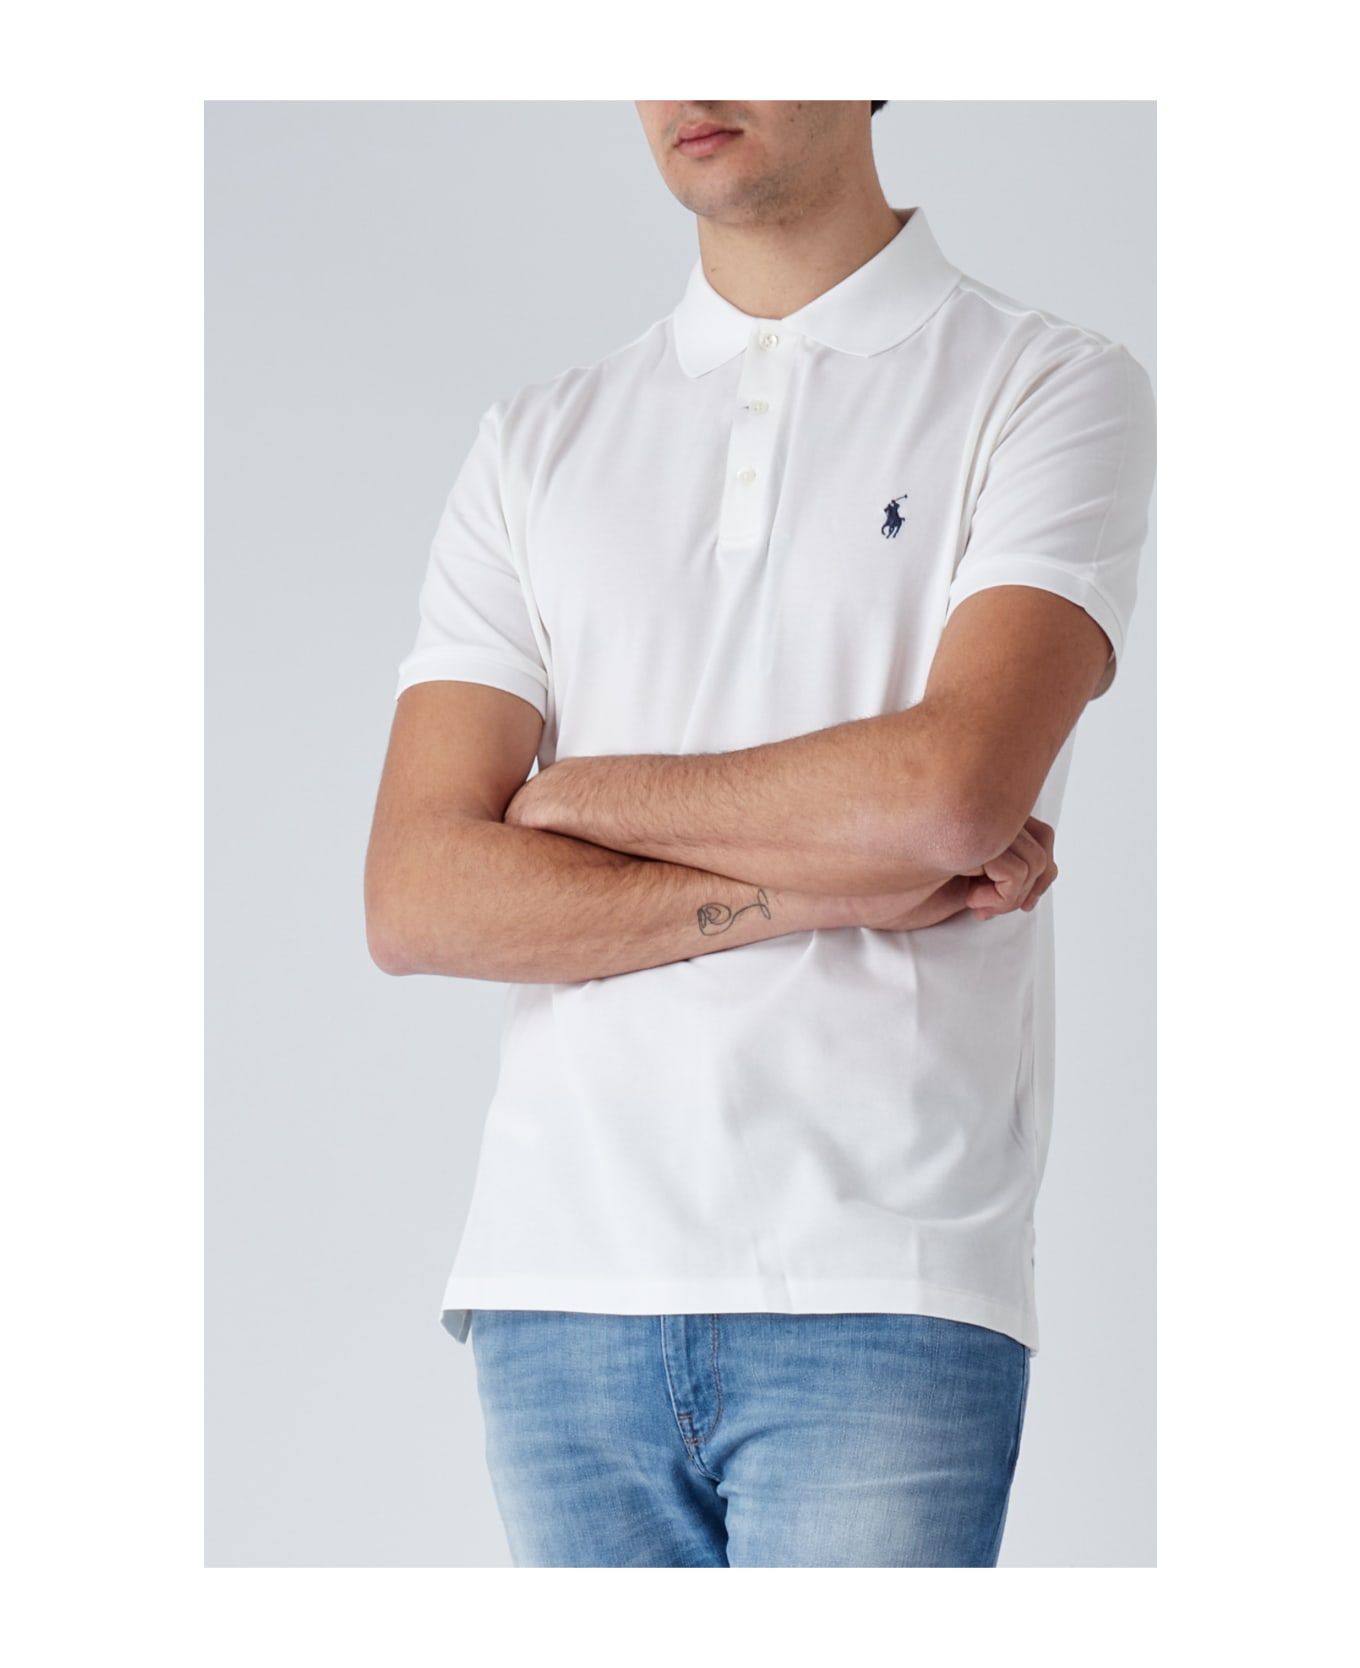 Polo Ralph Lauren White Slim Fit Polo Shirt With Contrasting Pony - 008 ポロシャツ